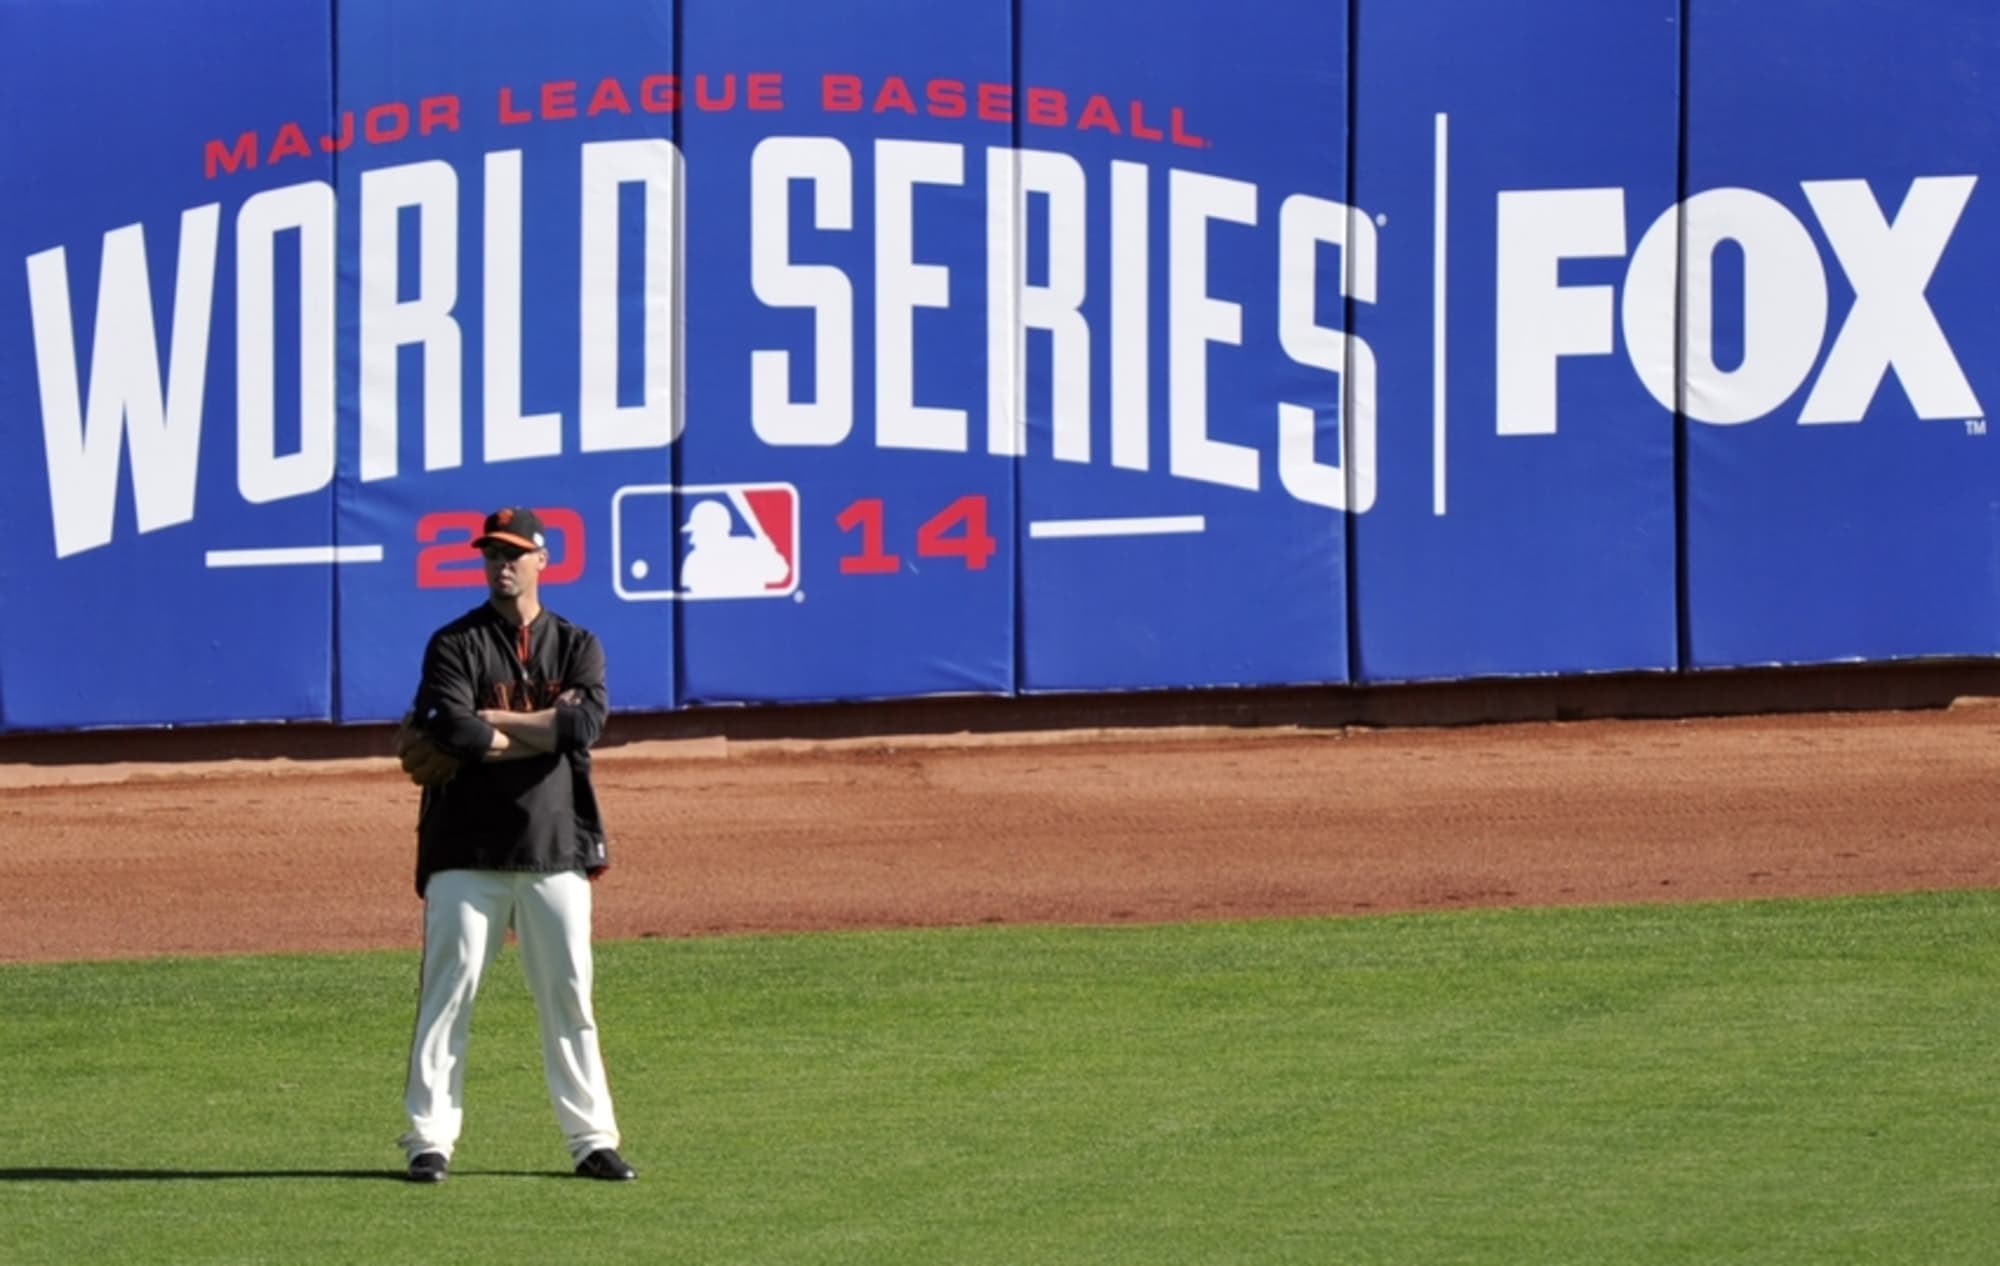 Royals Vs Giants Live Stream Watch World Series Game 4 Online